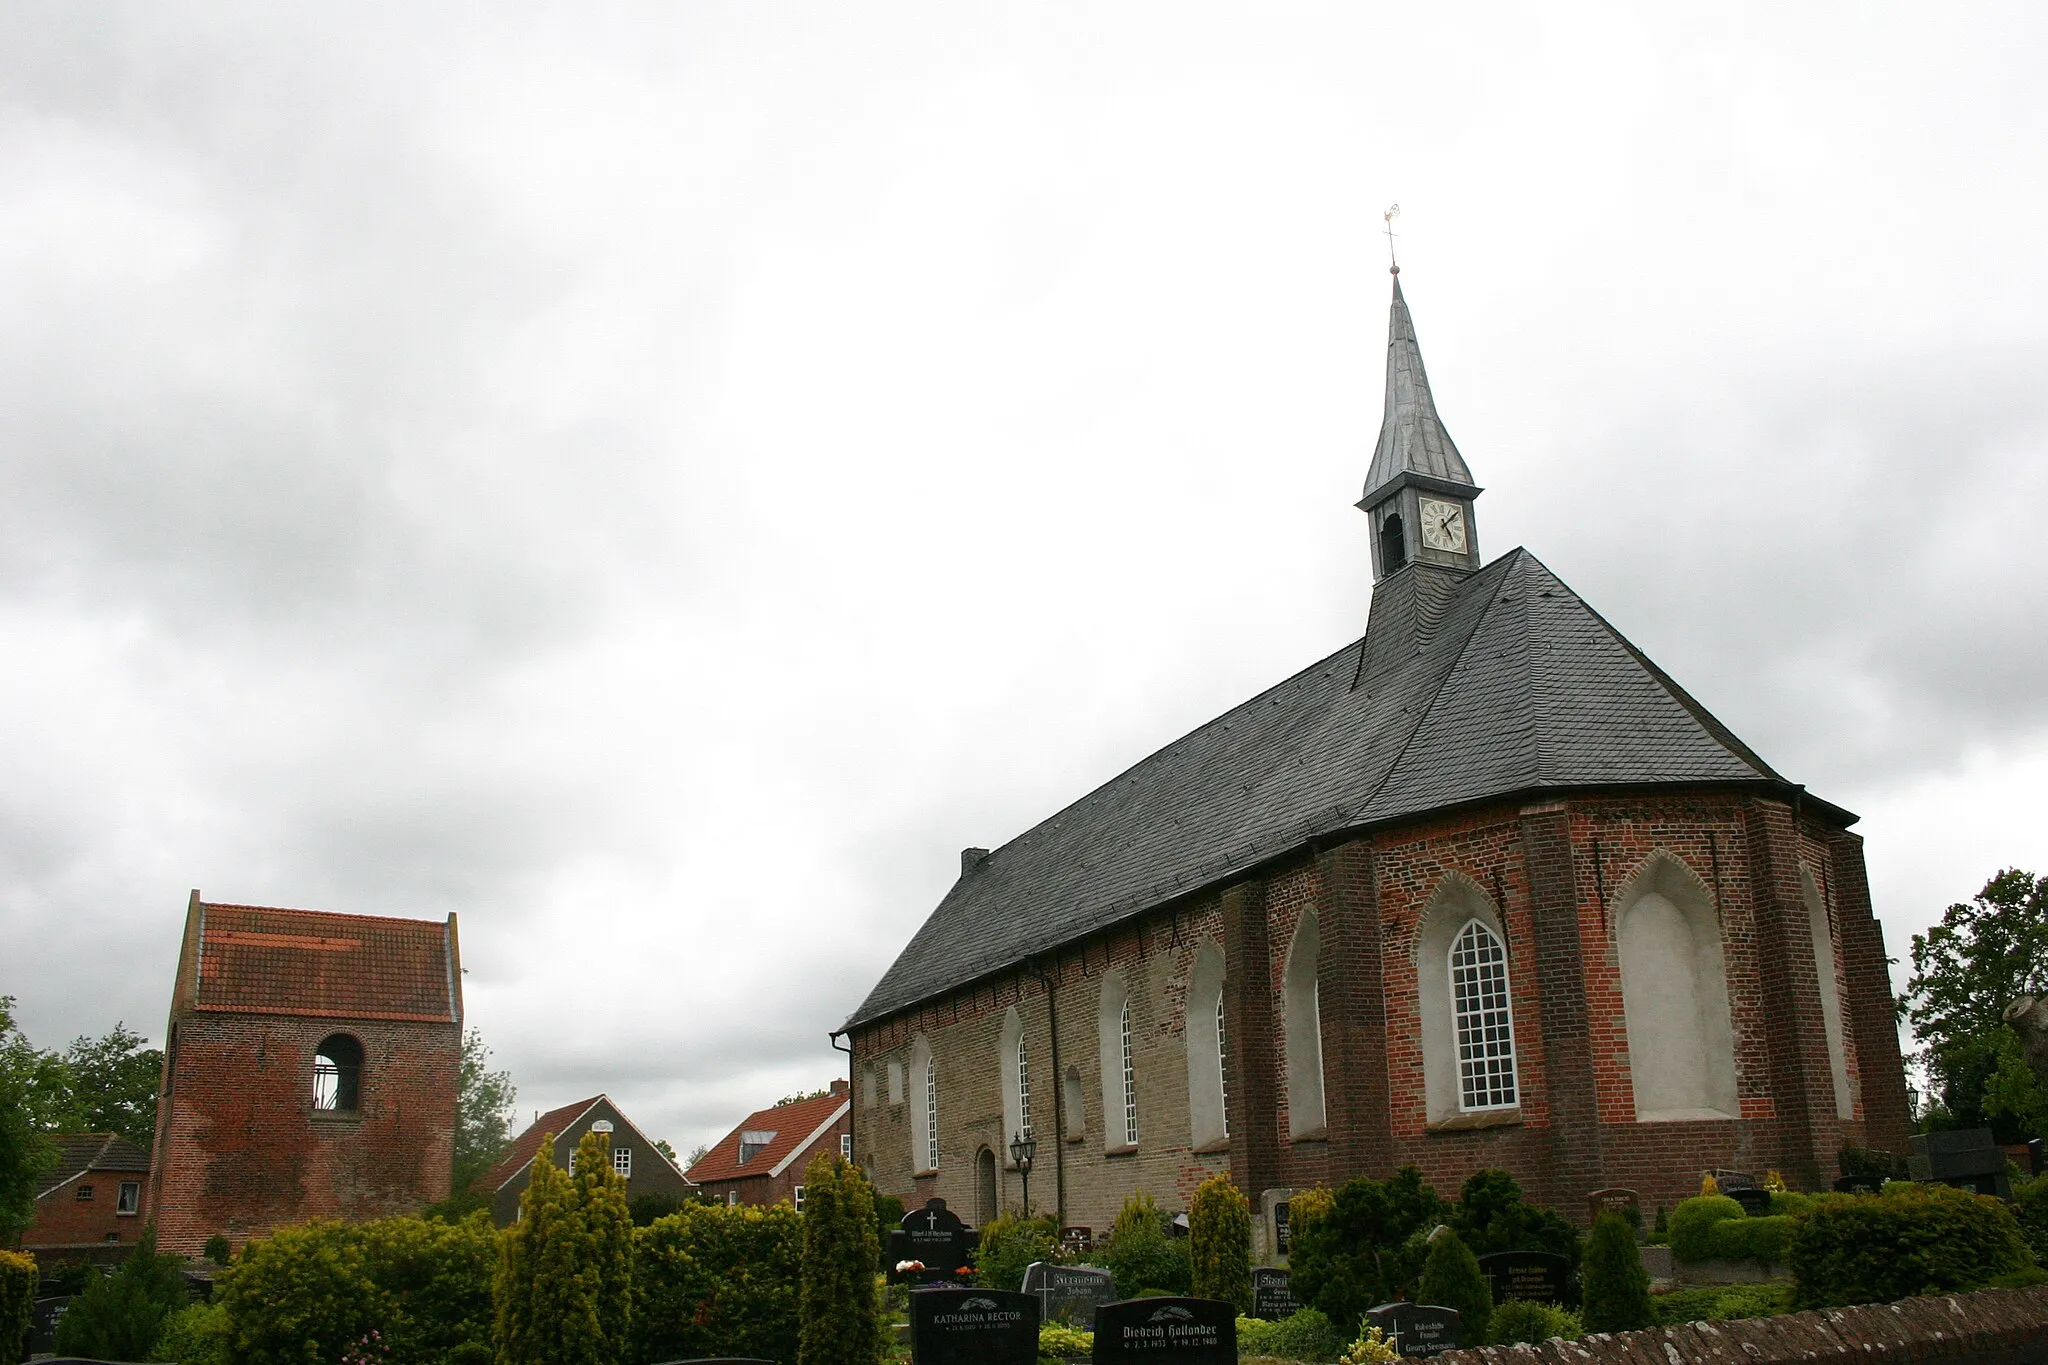 Photo showing: Historic St. Mary's Church in Nesse, district of Aurich, East Frisia, Germany